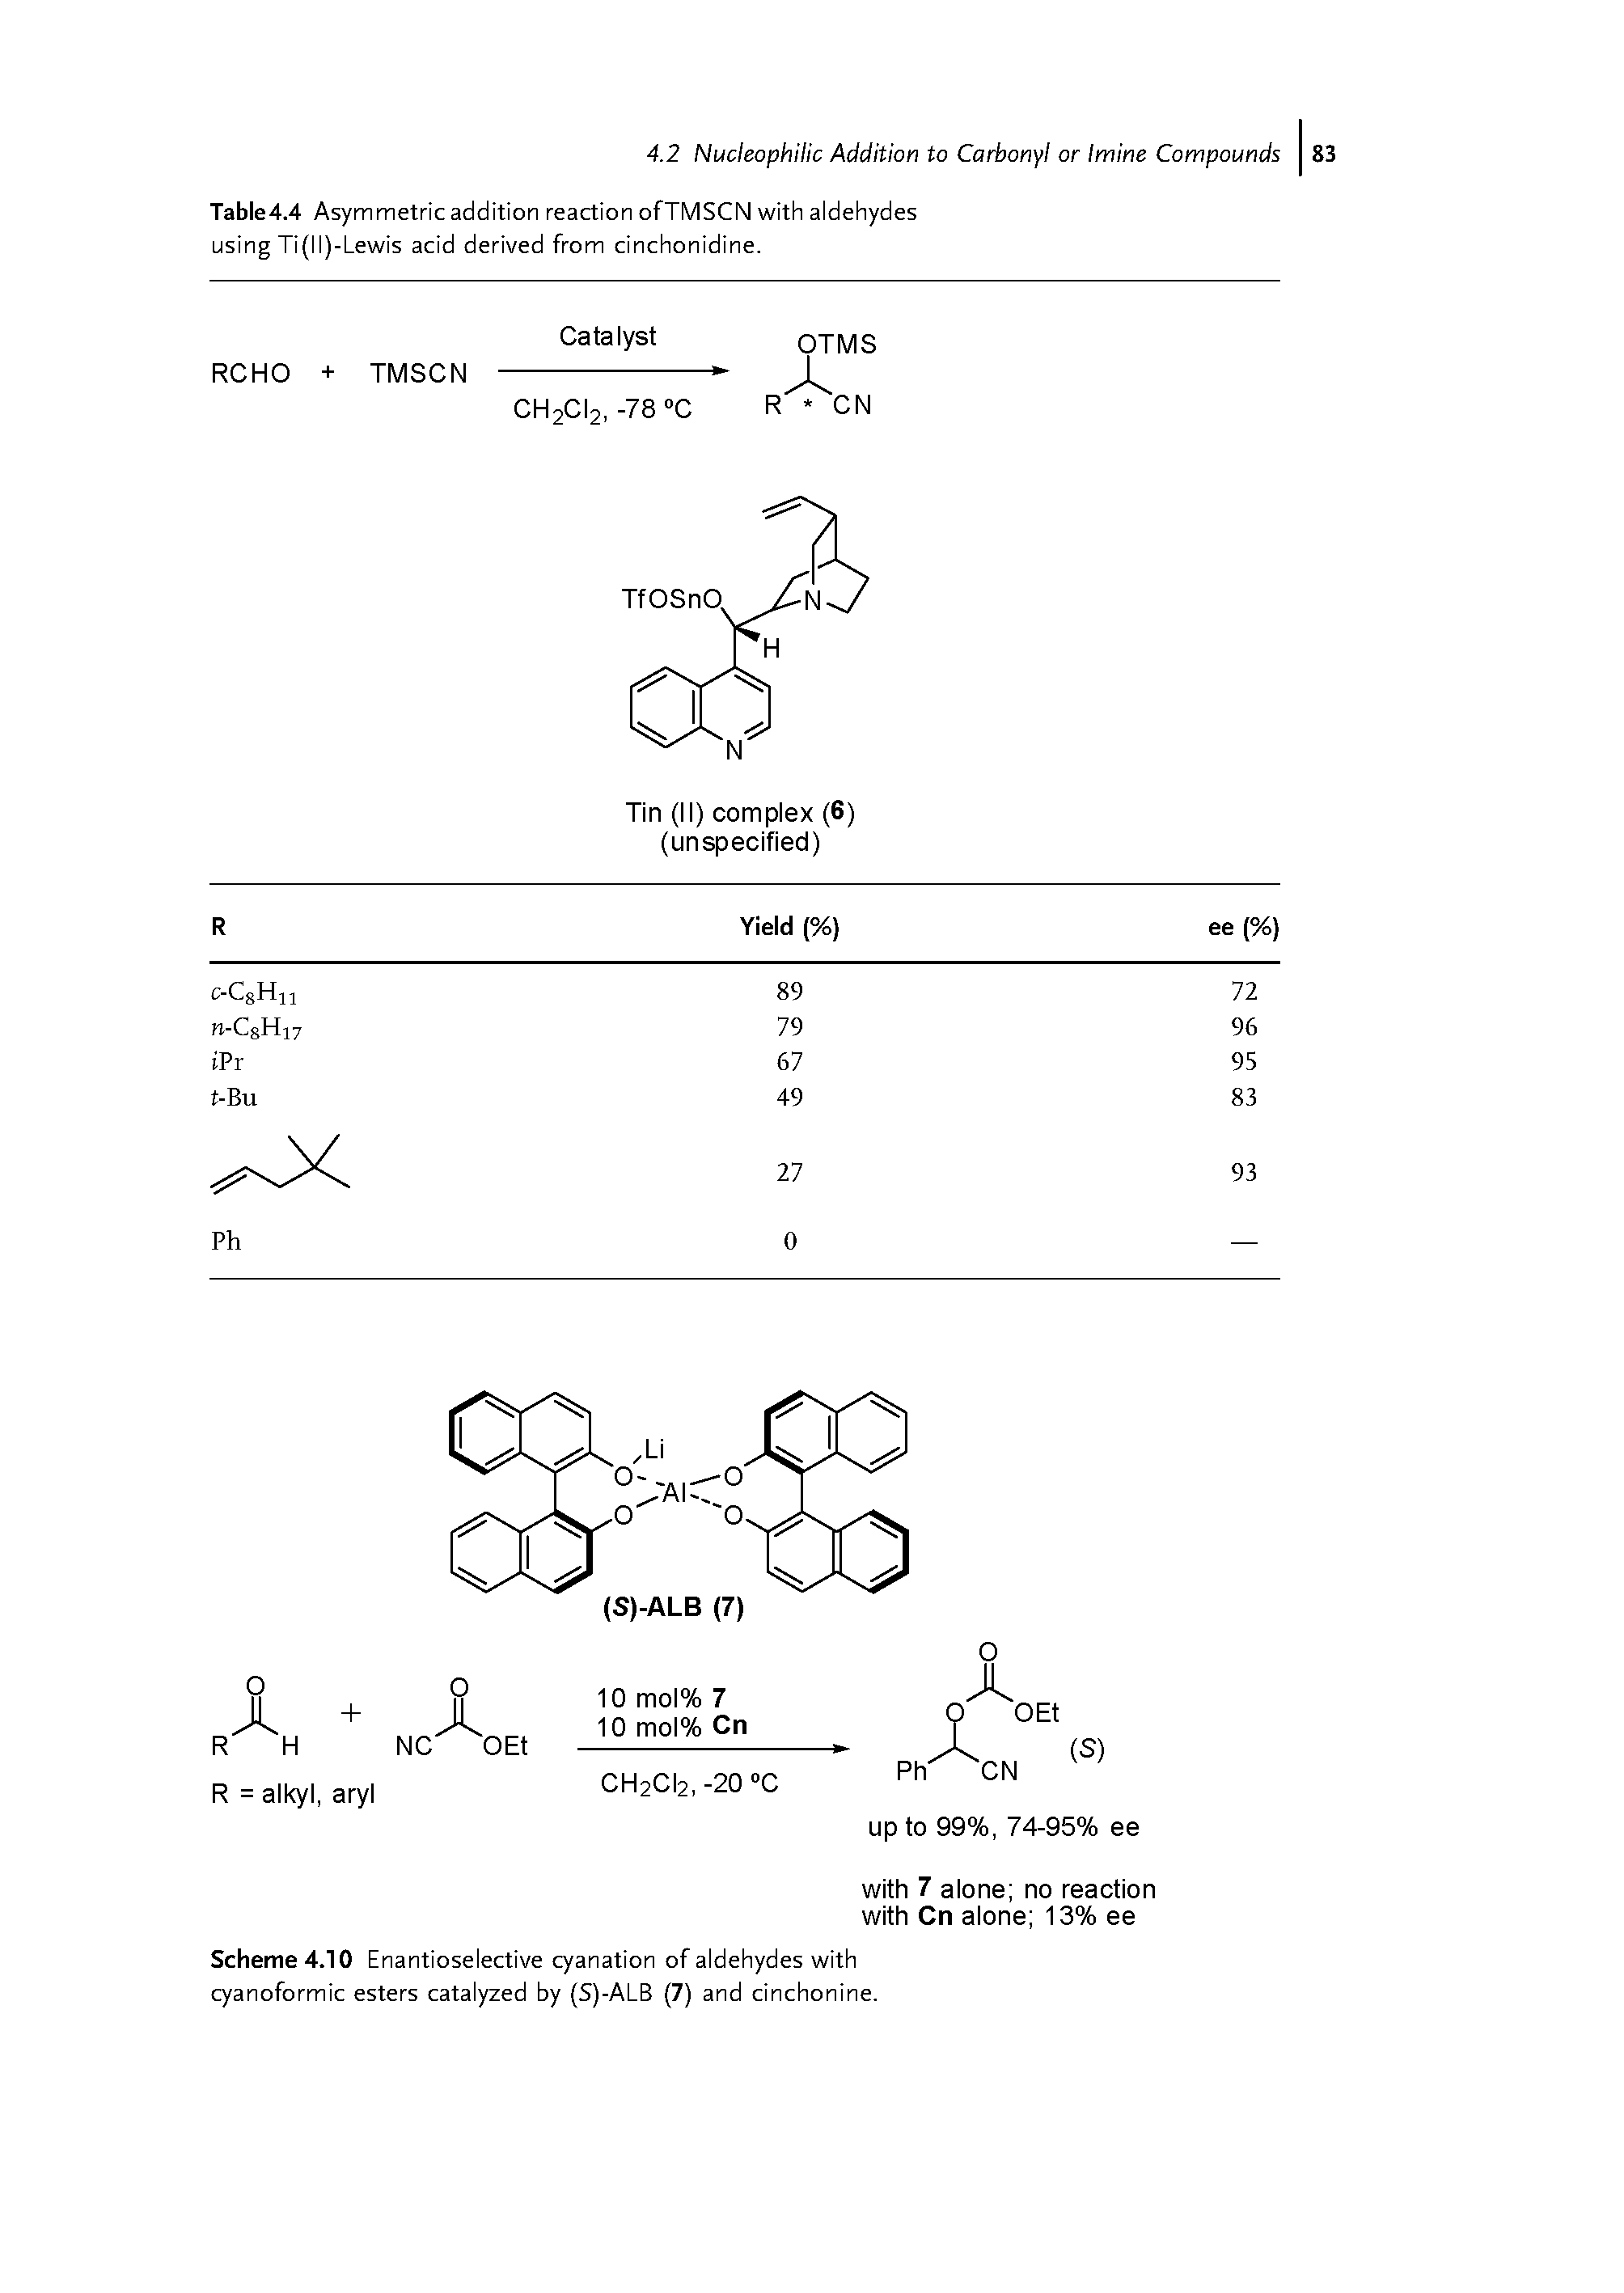 Table4.4 Asymmetric addition reaction ofTMSCN with aldehydes using Ti(ll)-Lewis acid derived from cinchonidine.